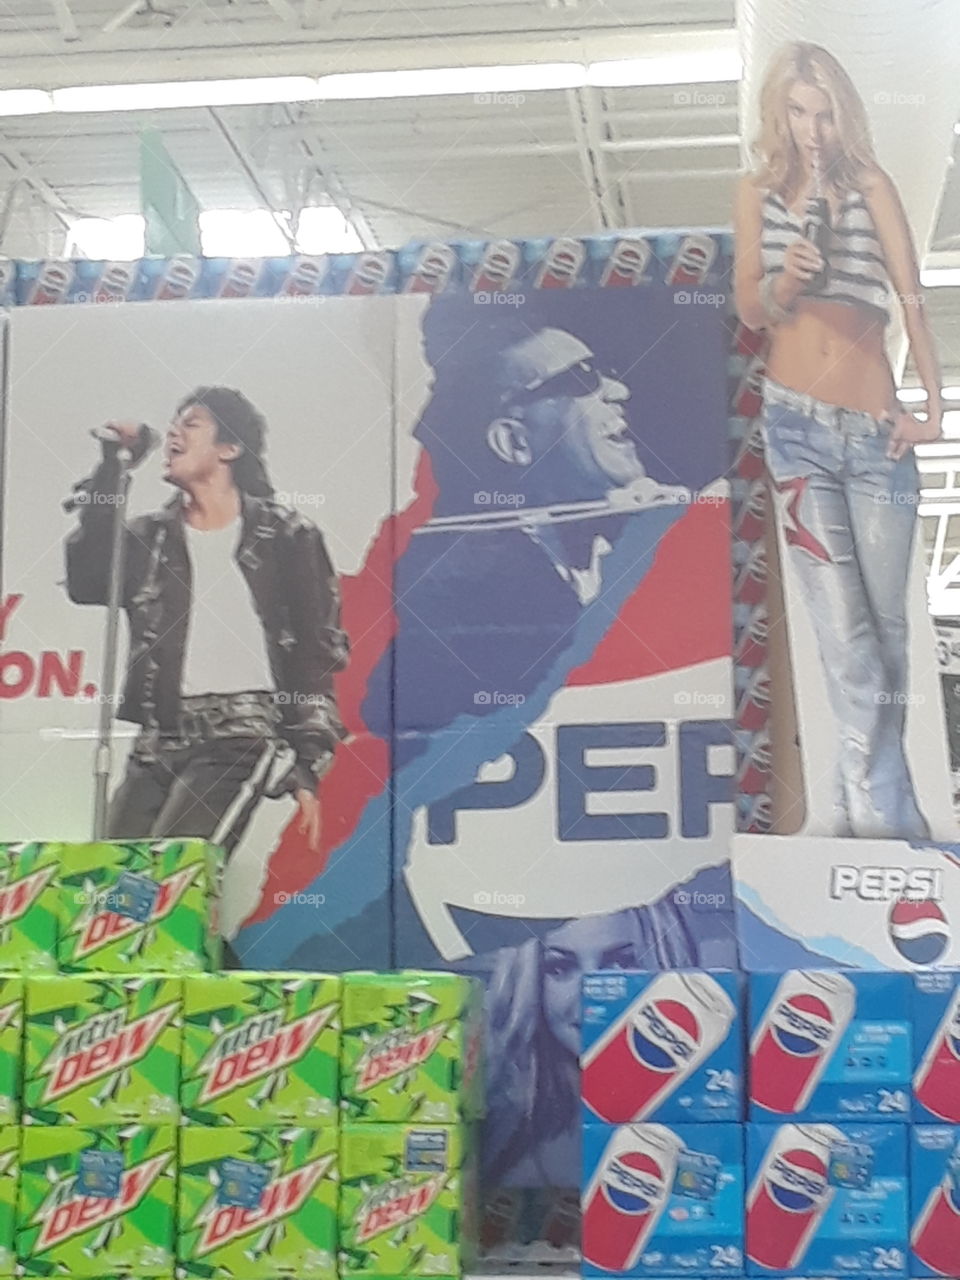 why Pepsi why???